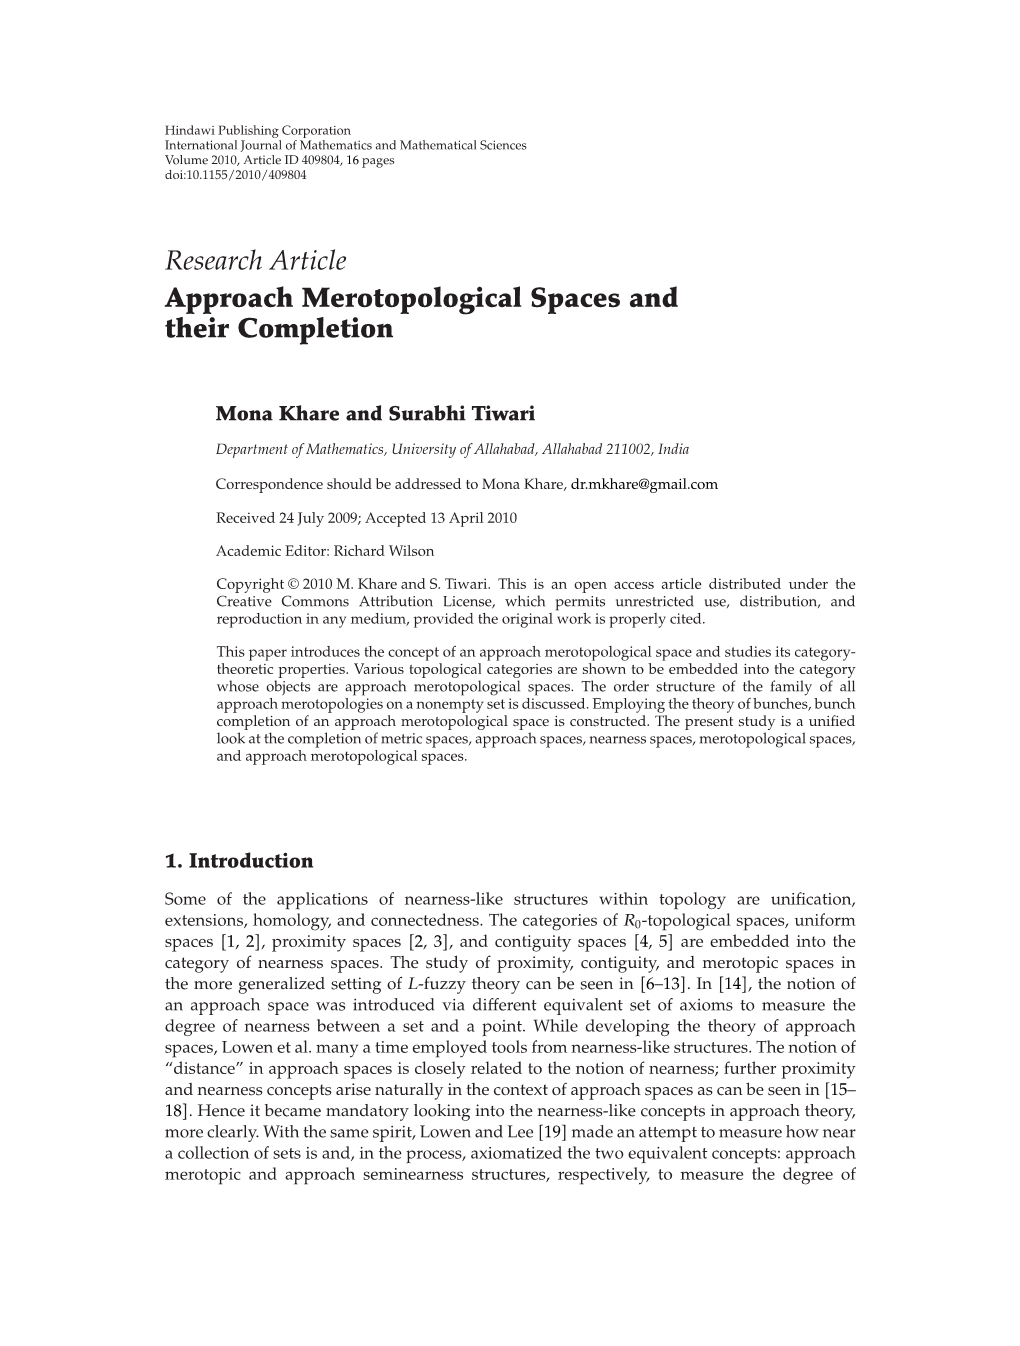 Approach Merotopological Spaces and Their Completion